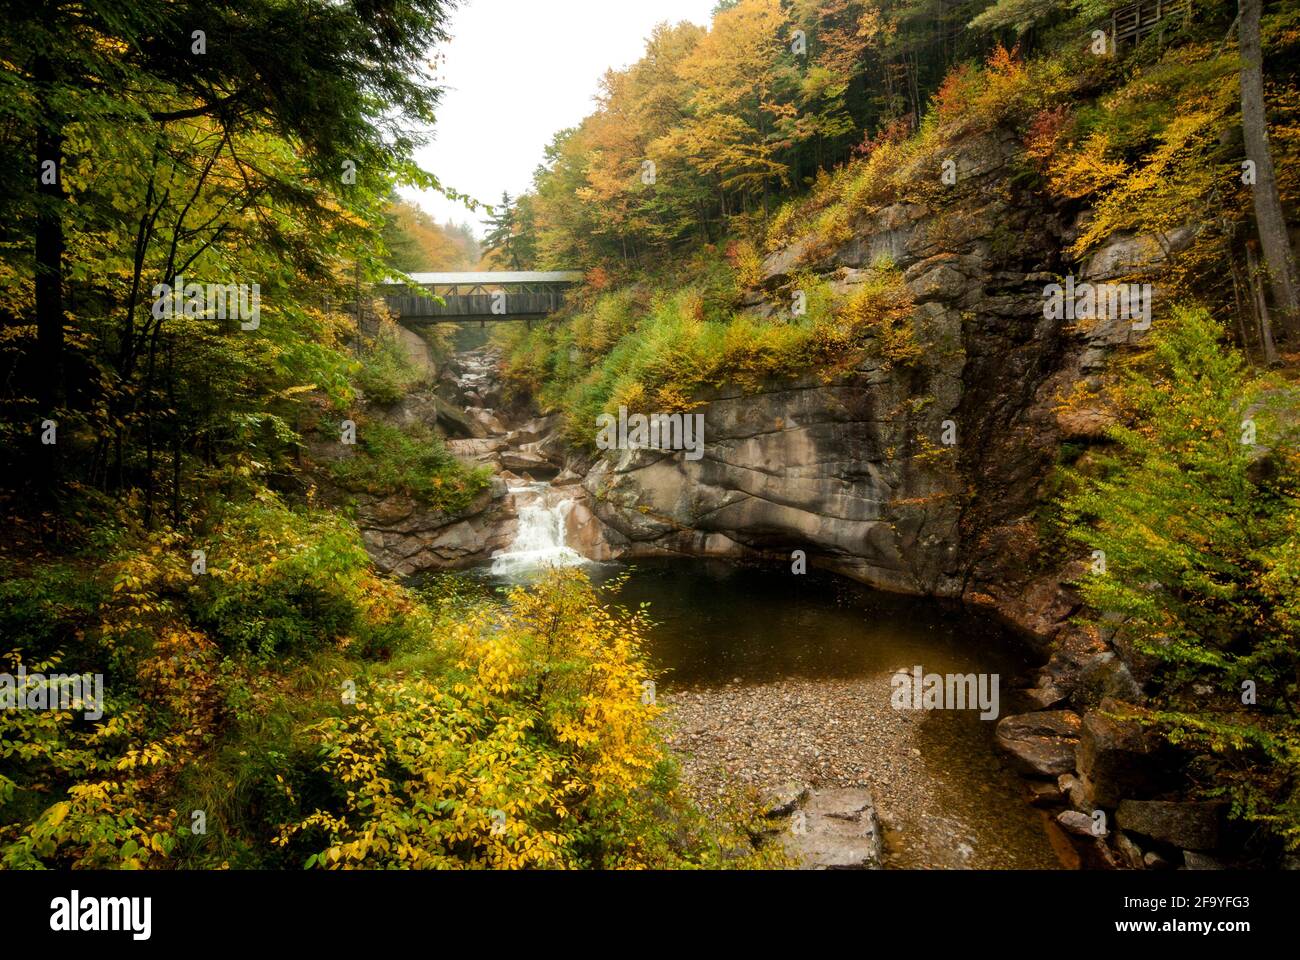 A covered bridge across the Pemigewasset River in Franconia Notch State Park, New Hampshire, USA in autumn / fall. Stock Photo